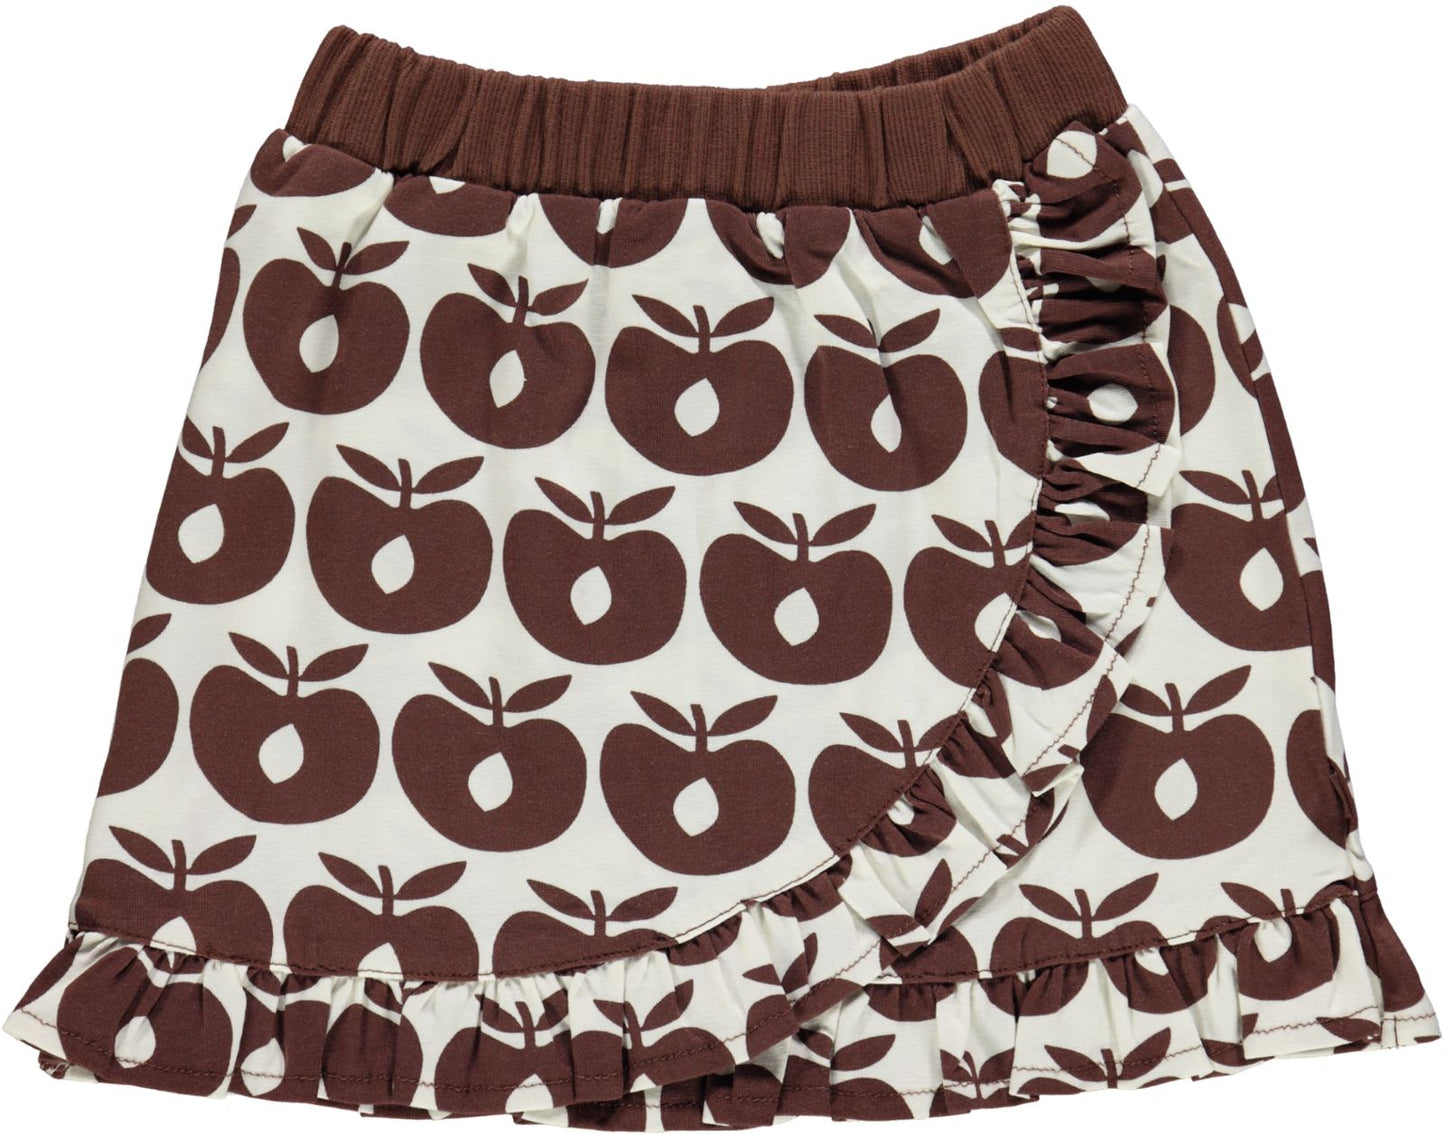 Skirt with Apples